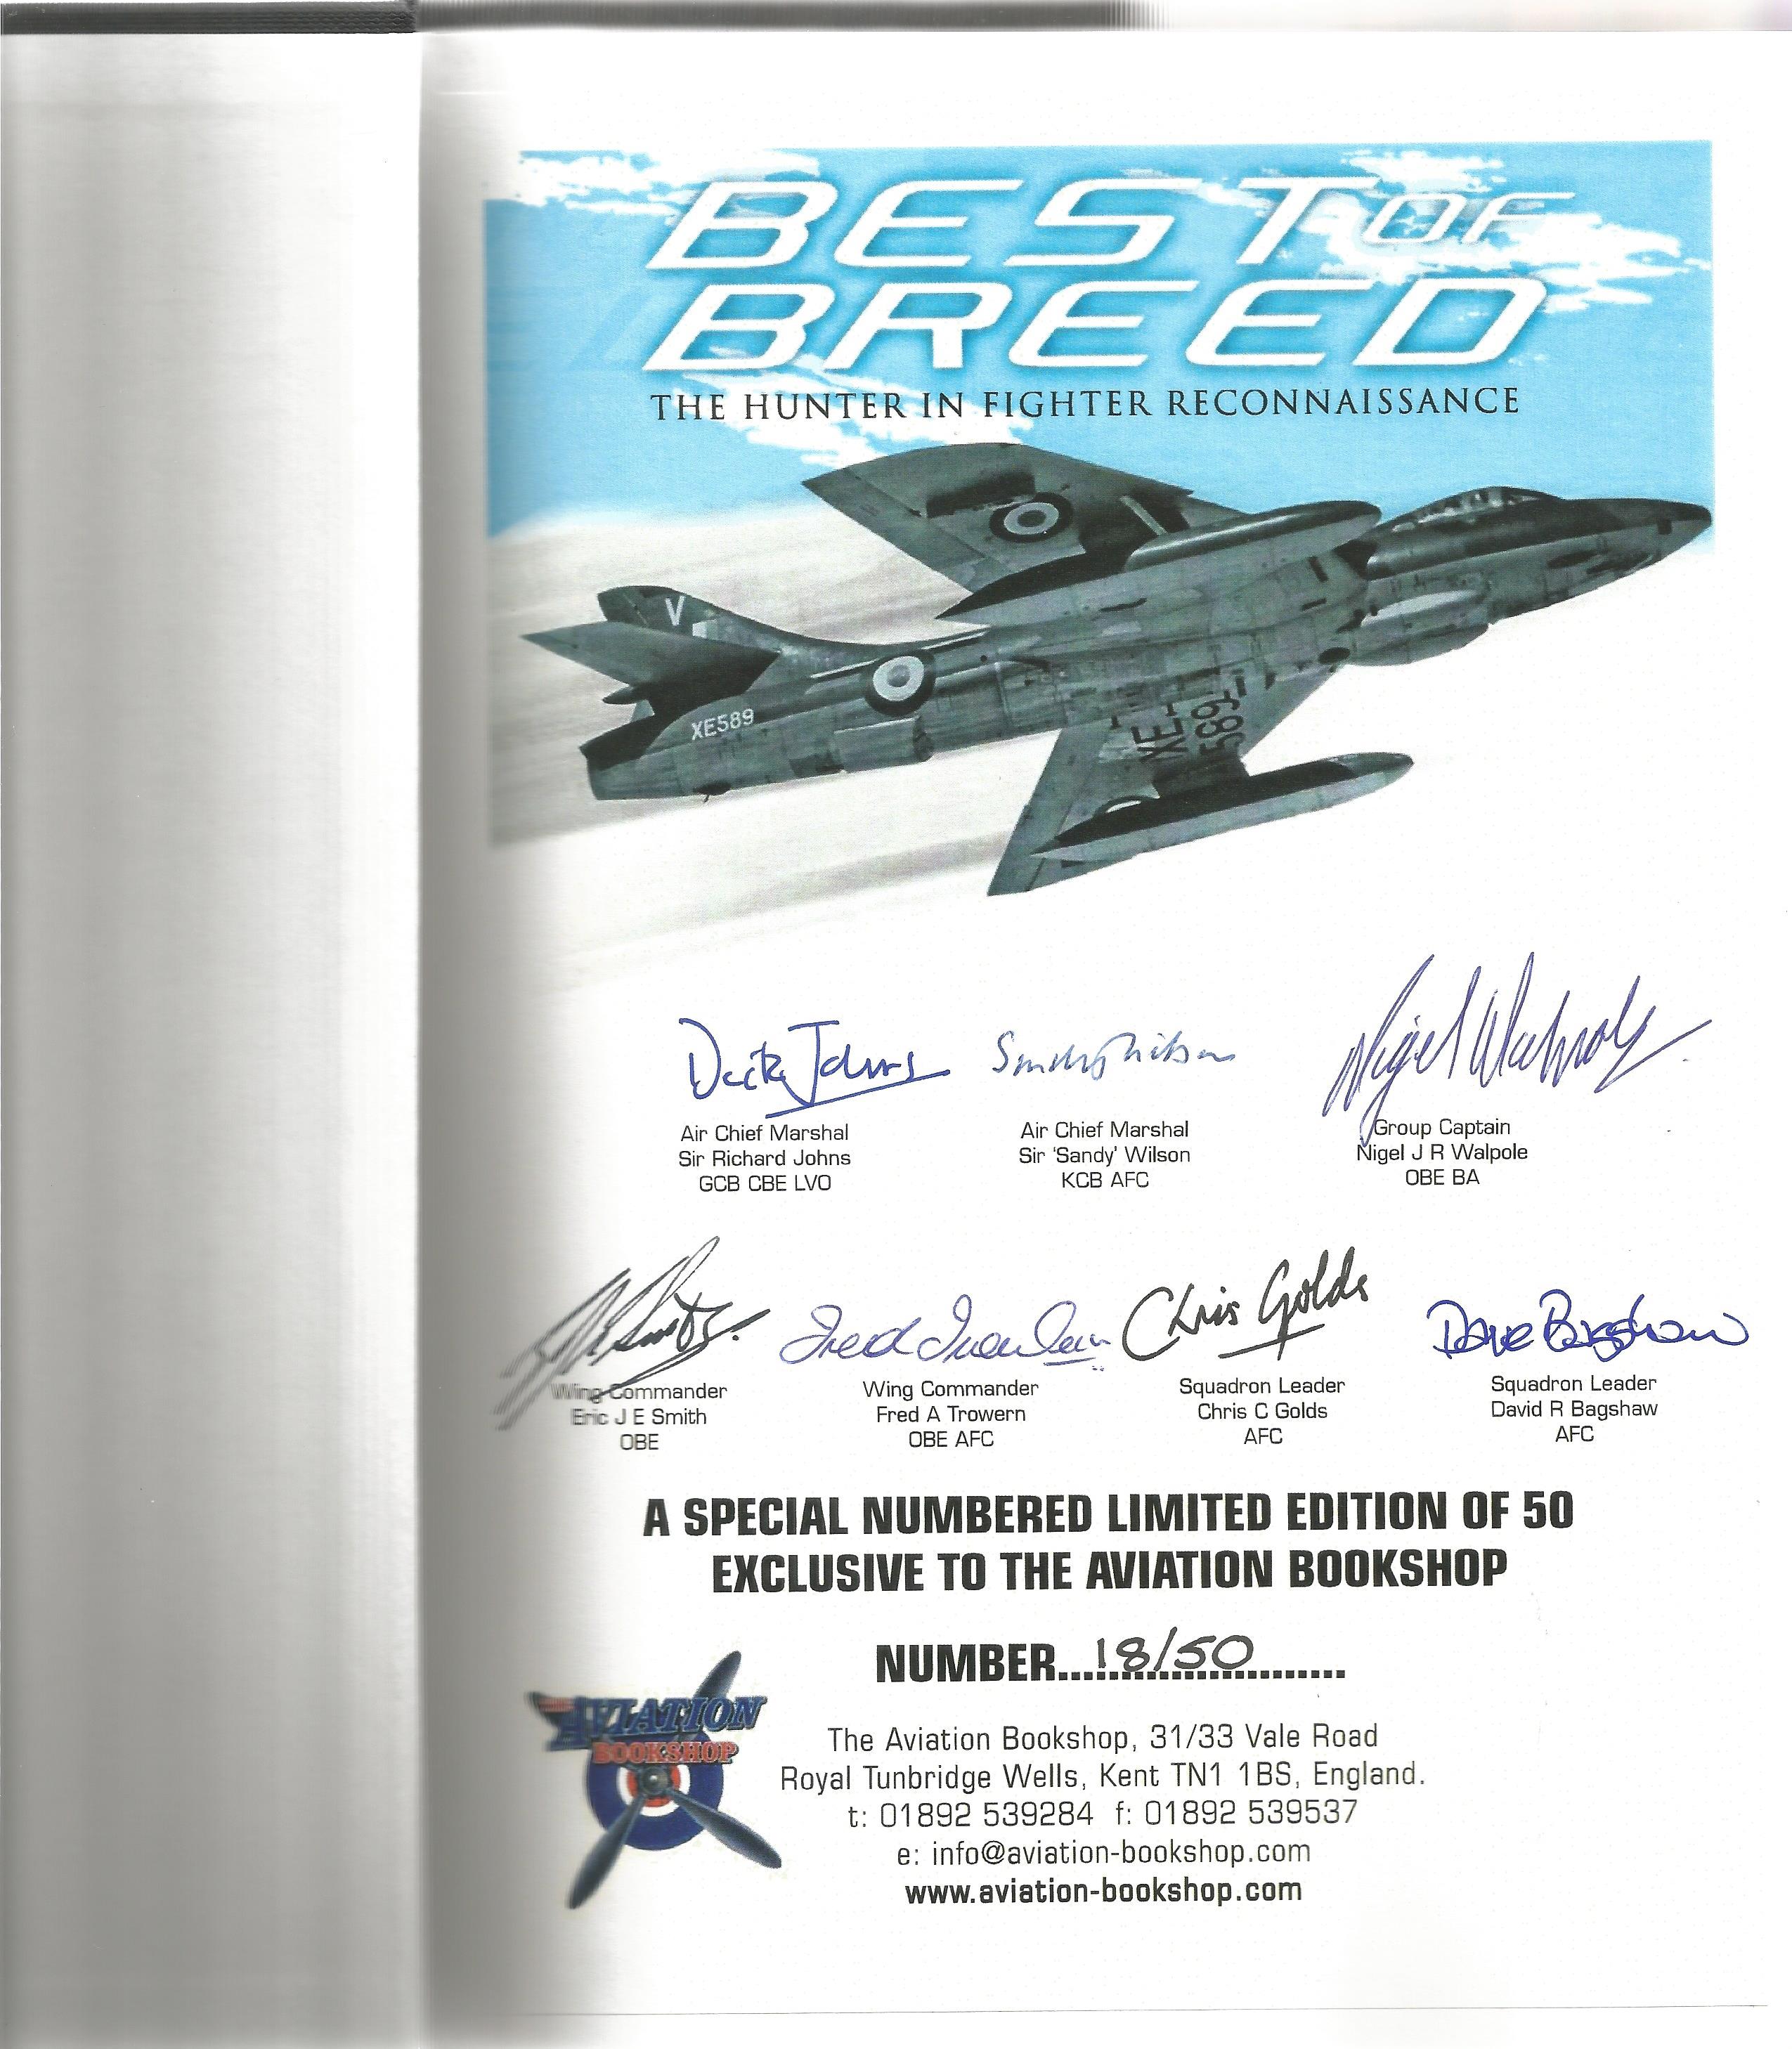 Nigel Walpole. Best Of Breed.- The Hunter In Fighter Reconnaissance. A First Edition Multi-Signed - Image 2 of 3